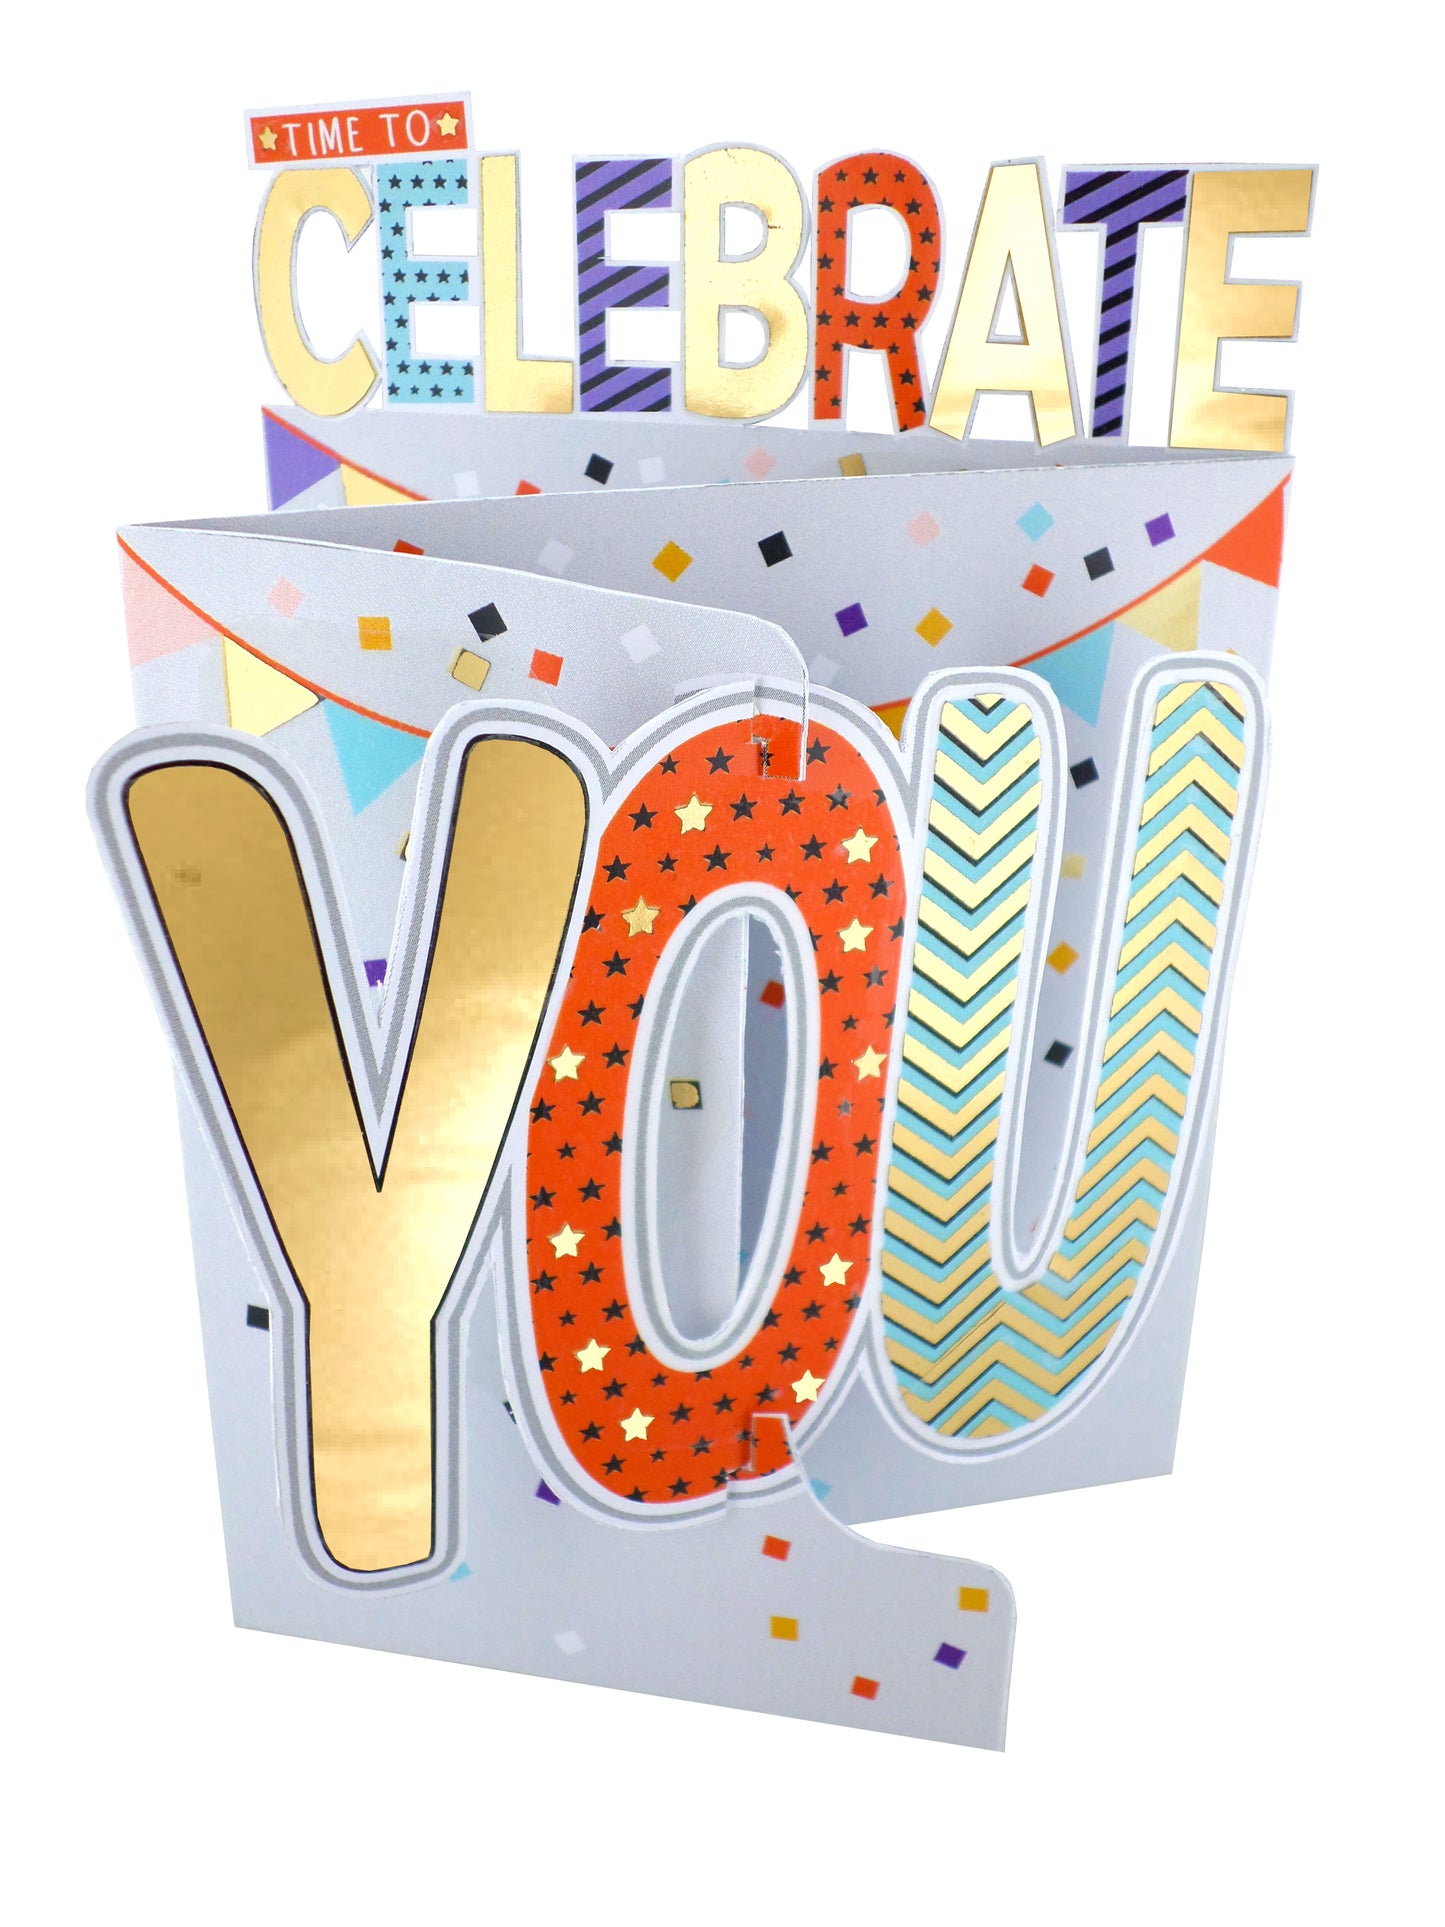 Time To Celebrate You 3D Cutting Edge Birthday Card